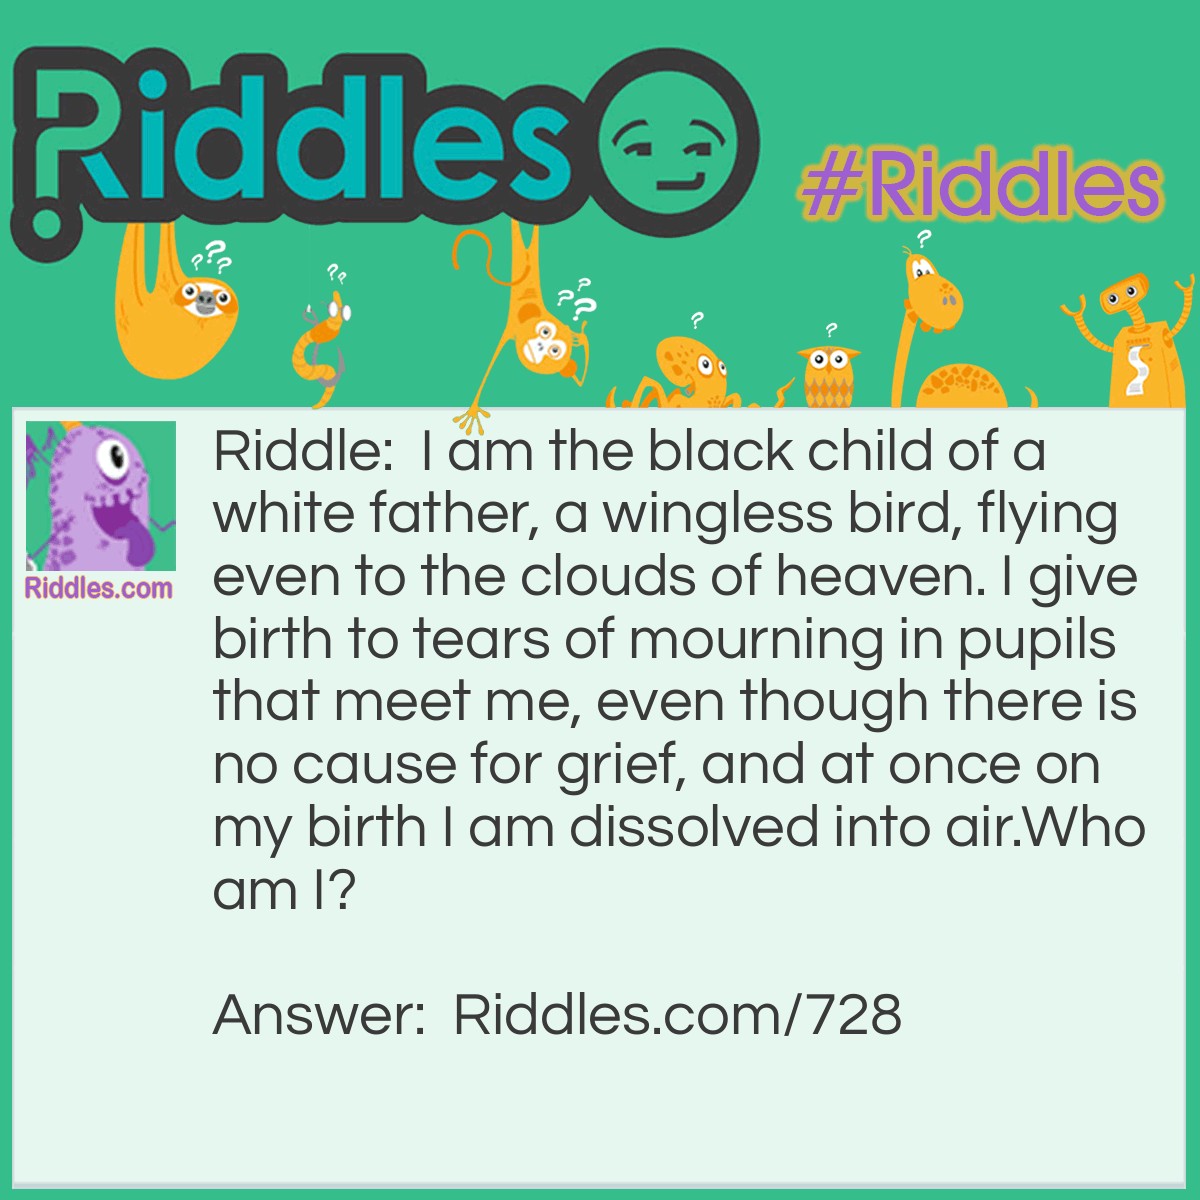 Riddle: I am the black child of a white father, a wingless bird, flying even to the clouds of heaven. I give birth to tears of mourning in pupils that meet me, even though there is no cause for grief, and at once on my birth I am dissolved into air.
Who am I? Answer: I am Smoke.